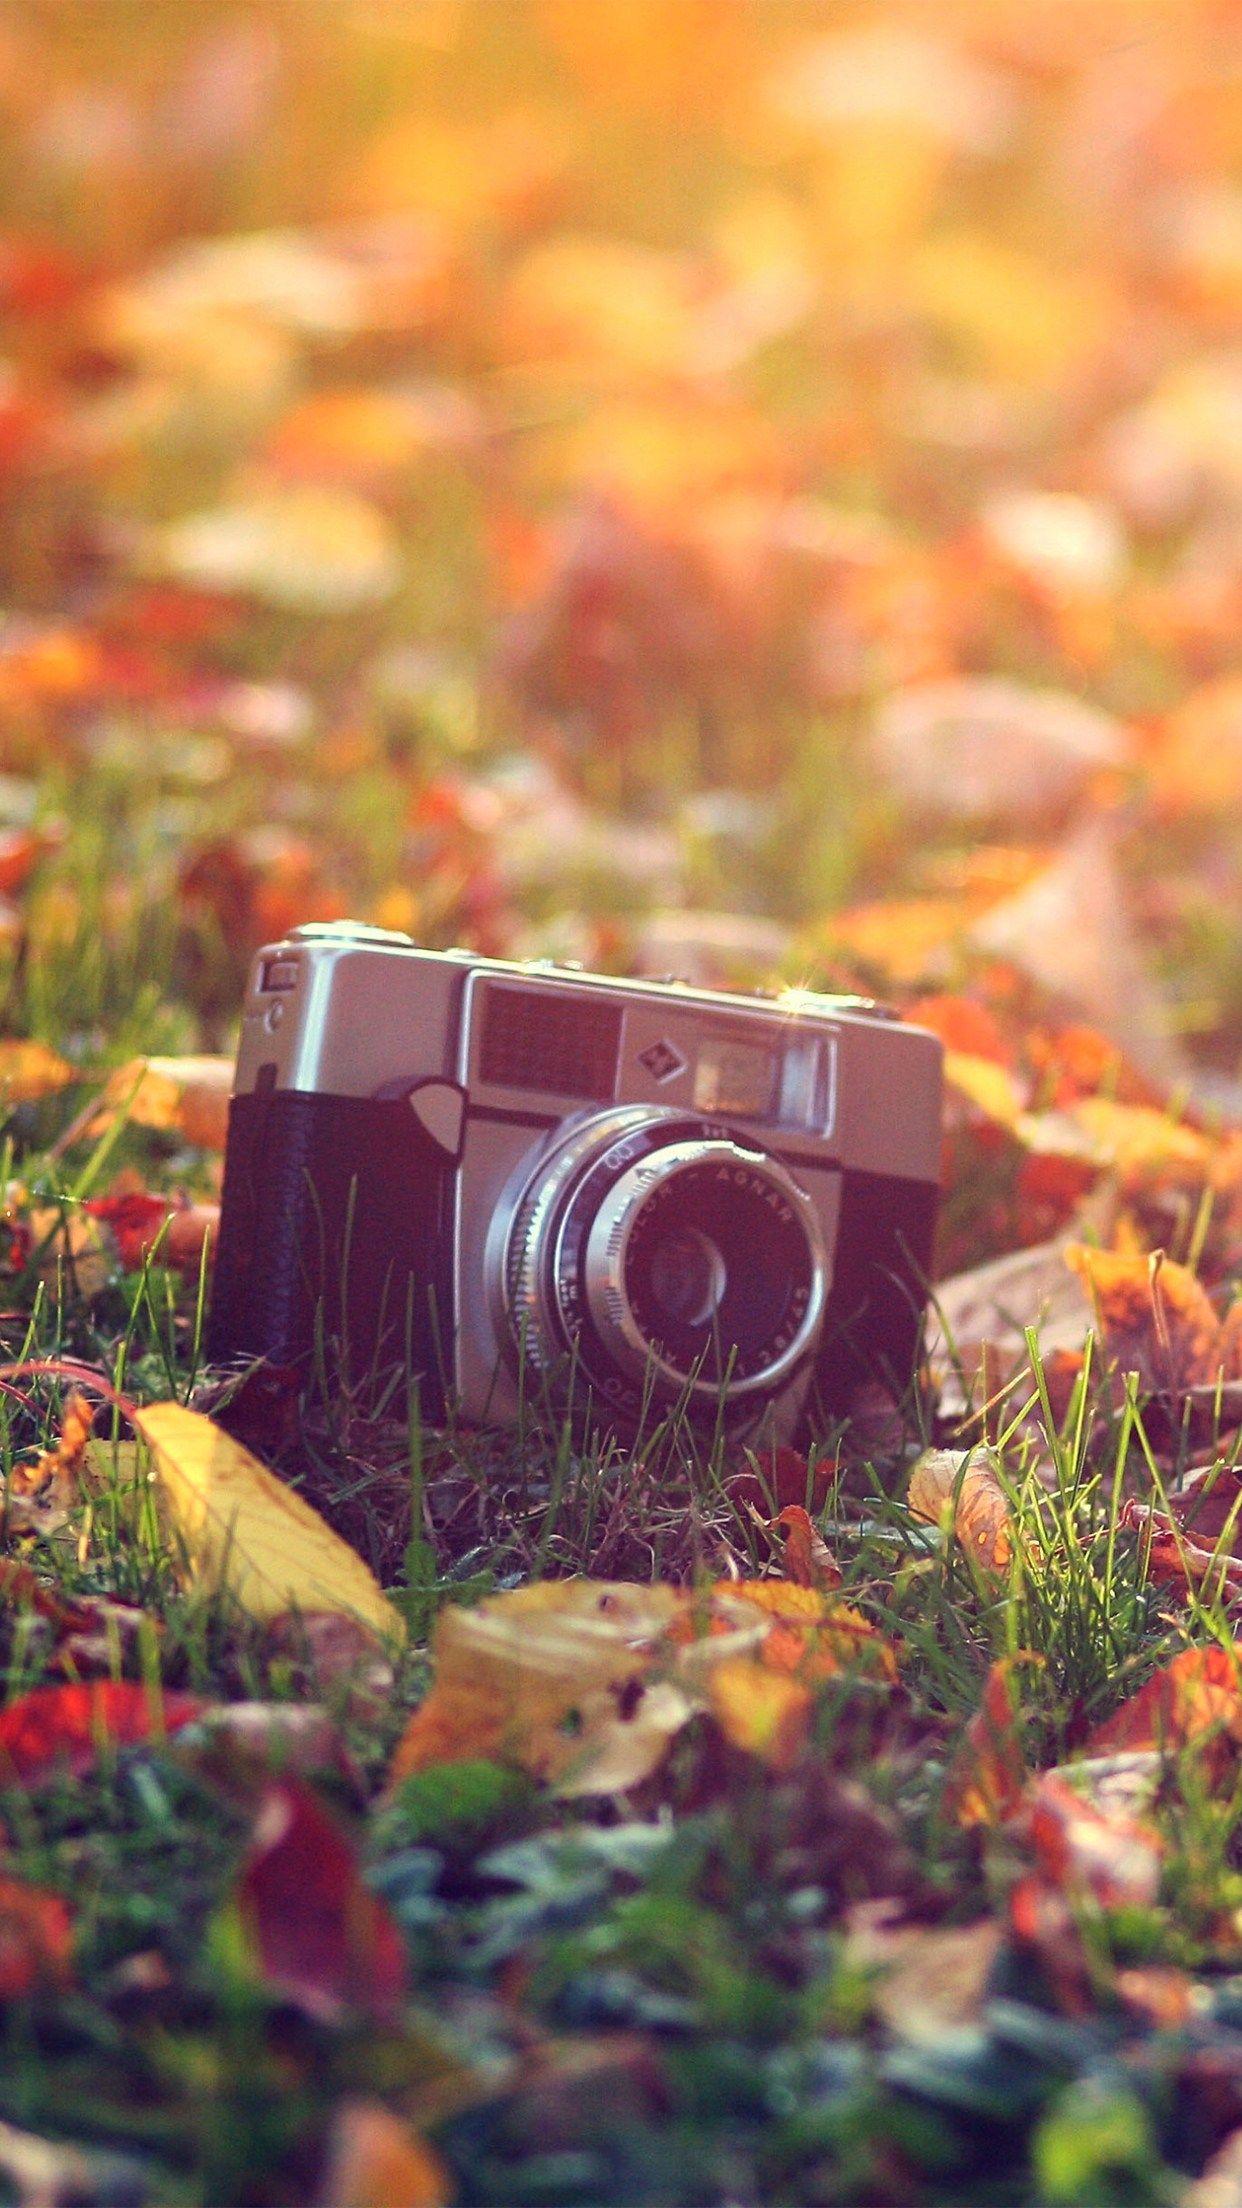 Vintage Camera Wallpaper for iPhone Pro Max, X, 6